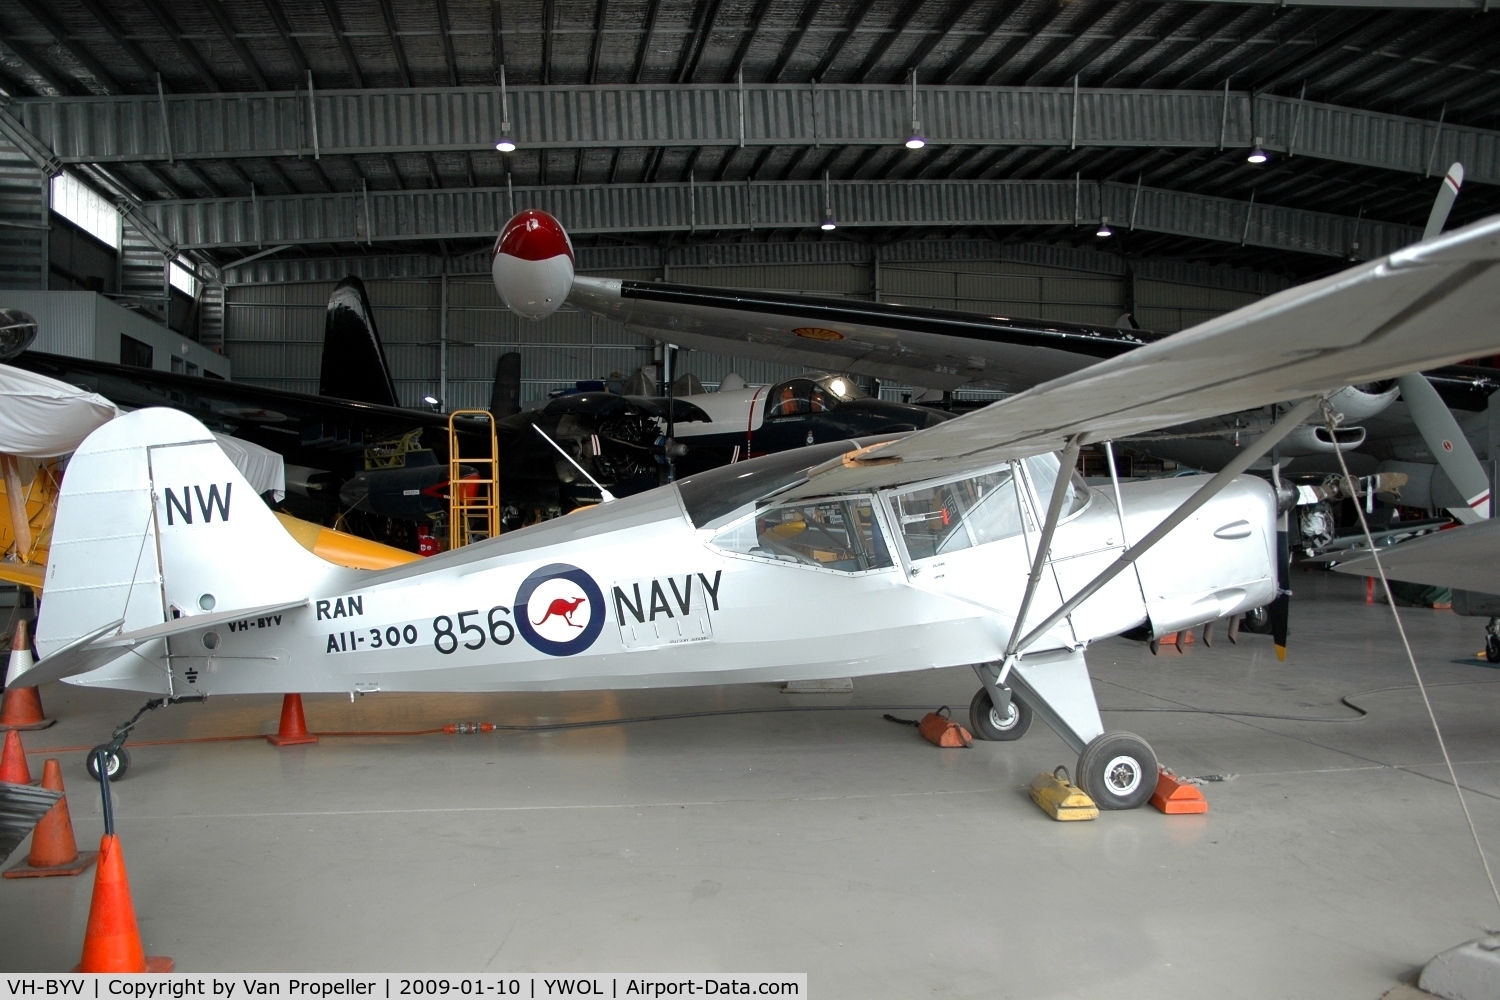 VH-BYV, Auster J/5G Cirrus Autocar C/N 3163, Auster J/5G Cirrus Autocar in the HARS hangar at Albion Park /Wollongong airport, NSW, Australia, 2009. Painted in RAN A11-300 livery.